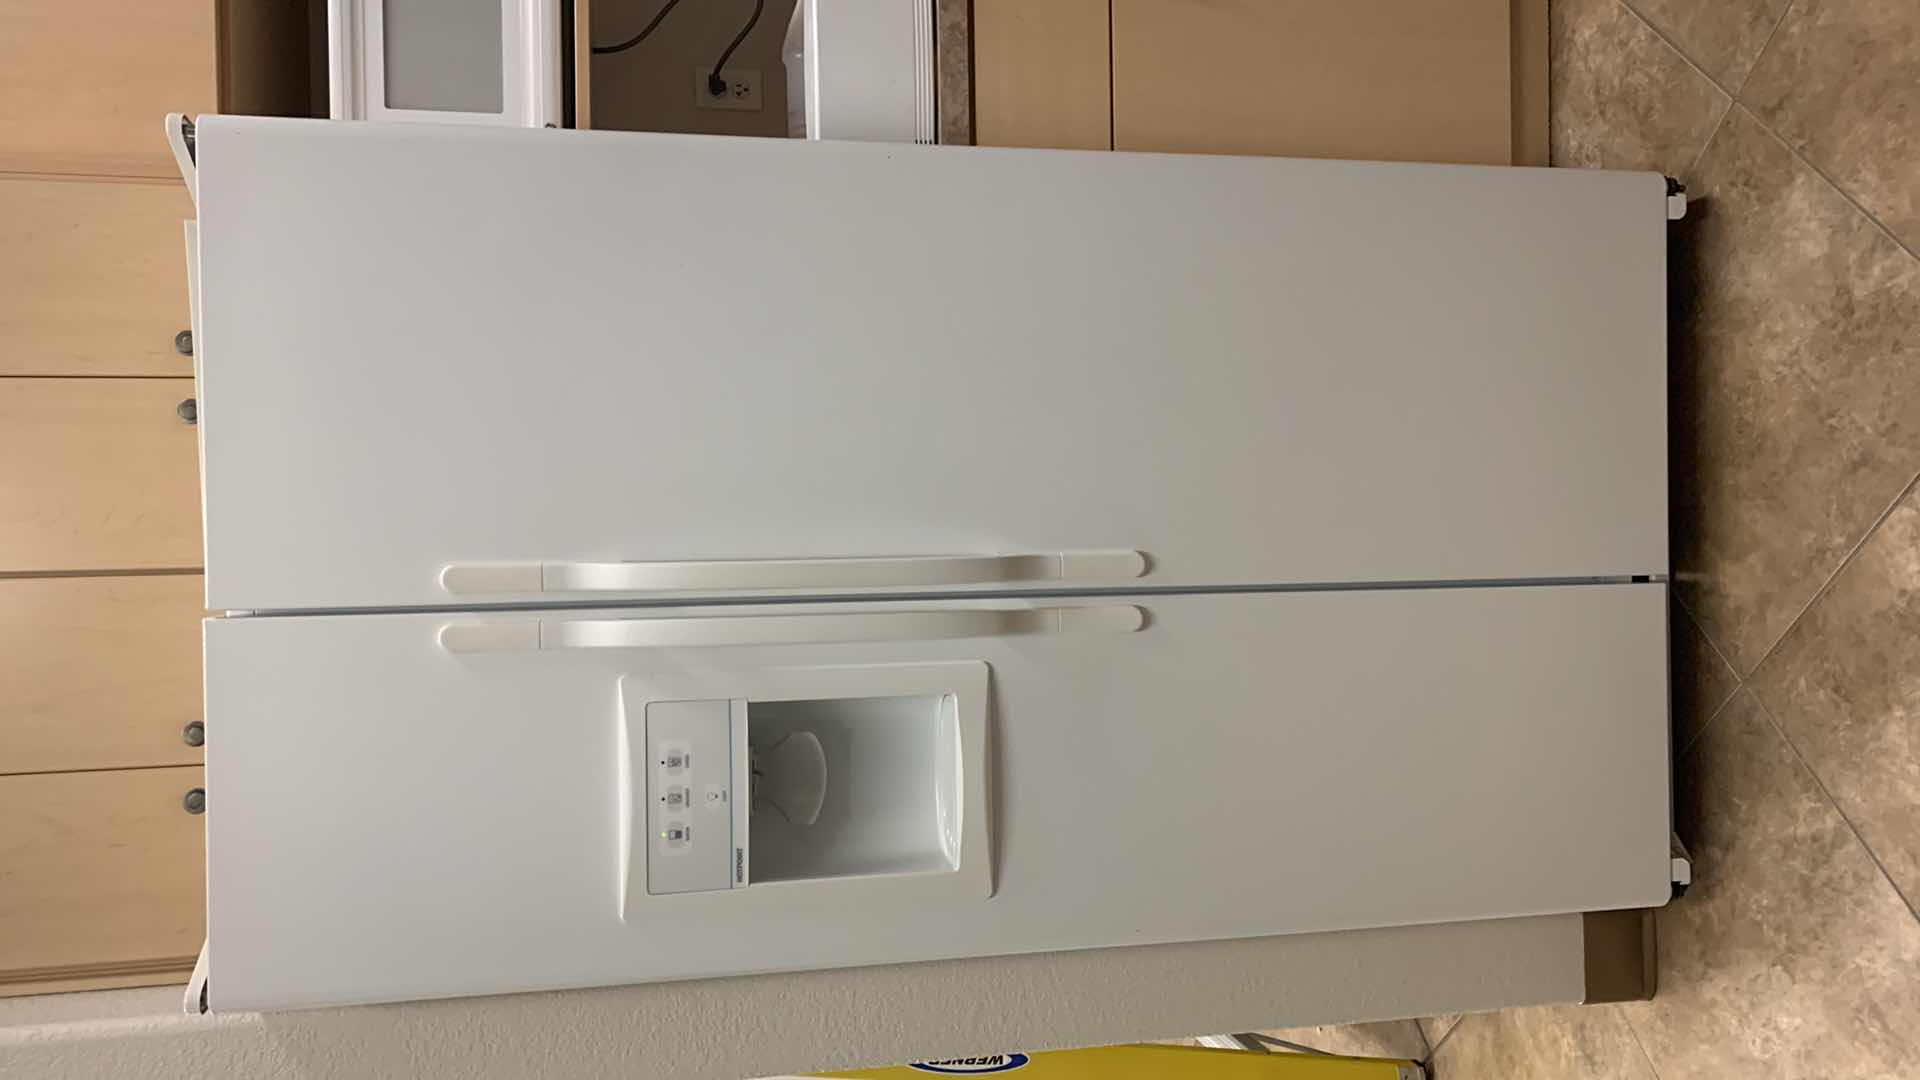 Photo 1 of HOTPOINT REFRIGERATOR WORKING, ( CONTENTS NOT INCLUDED)